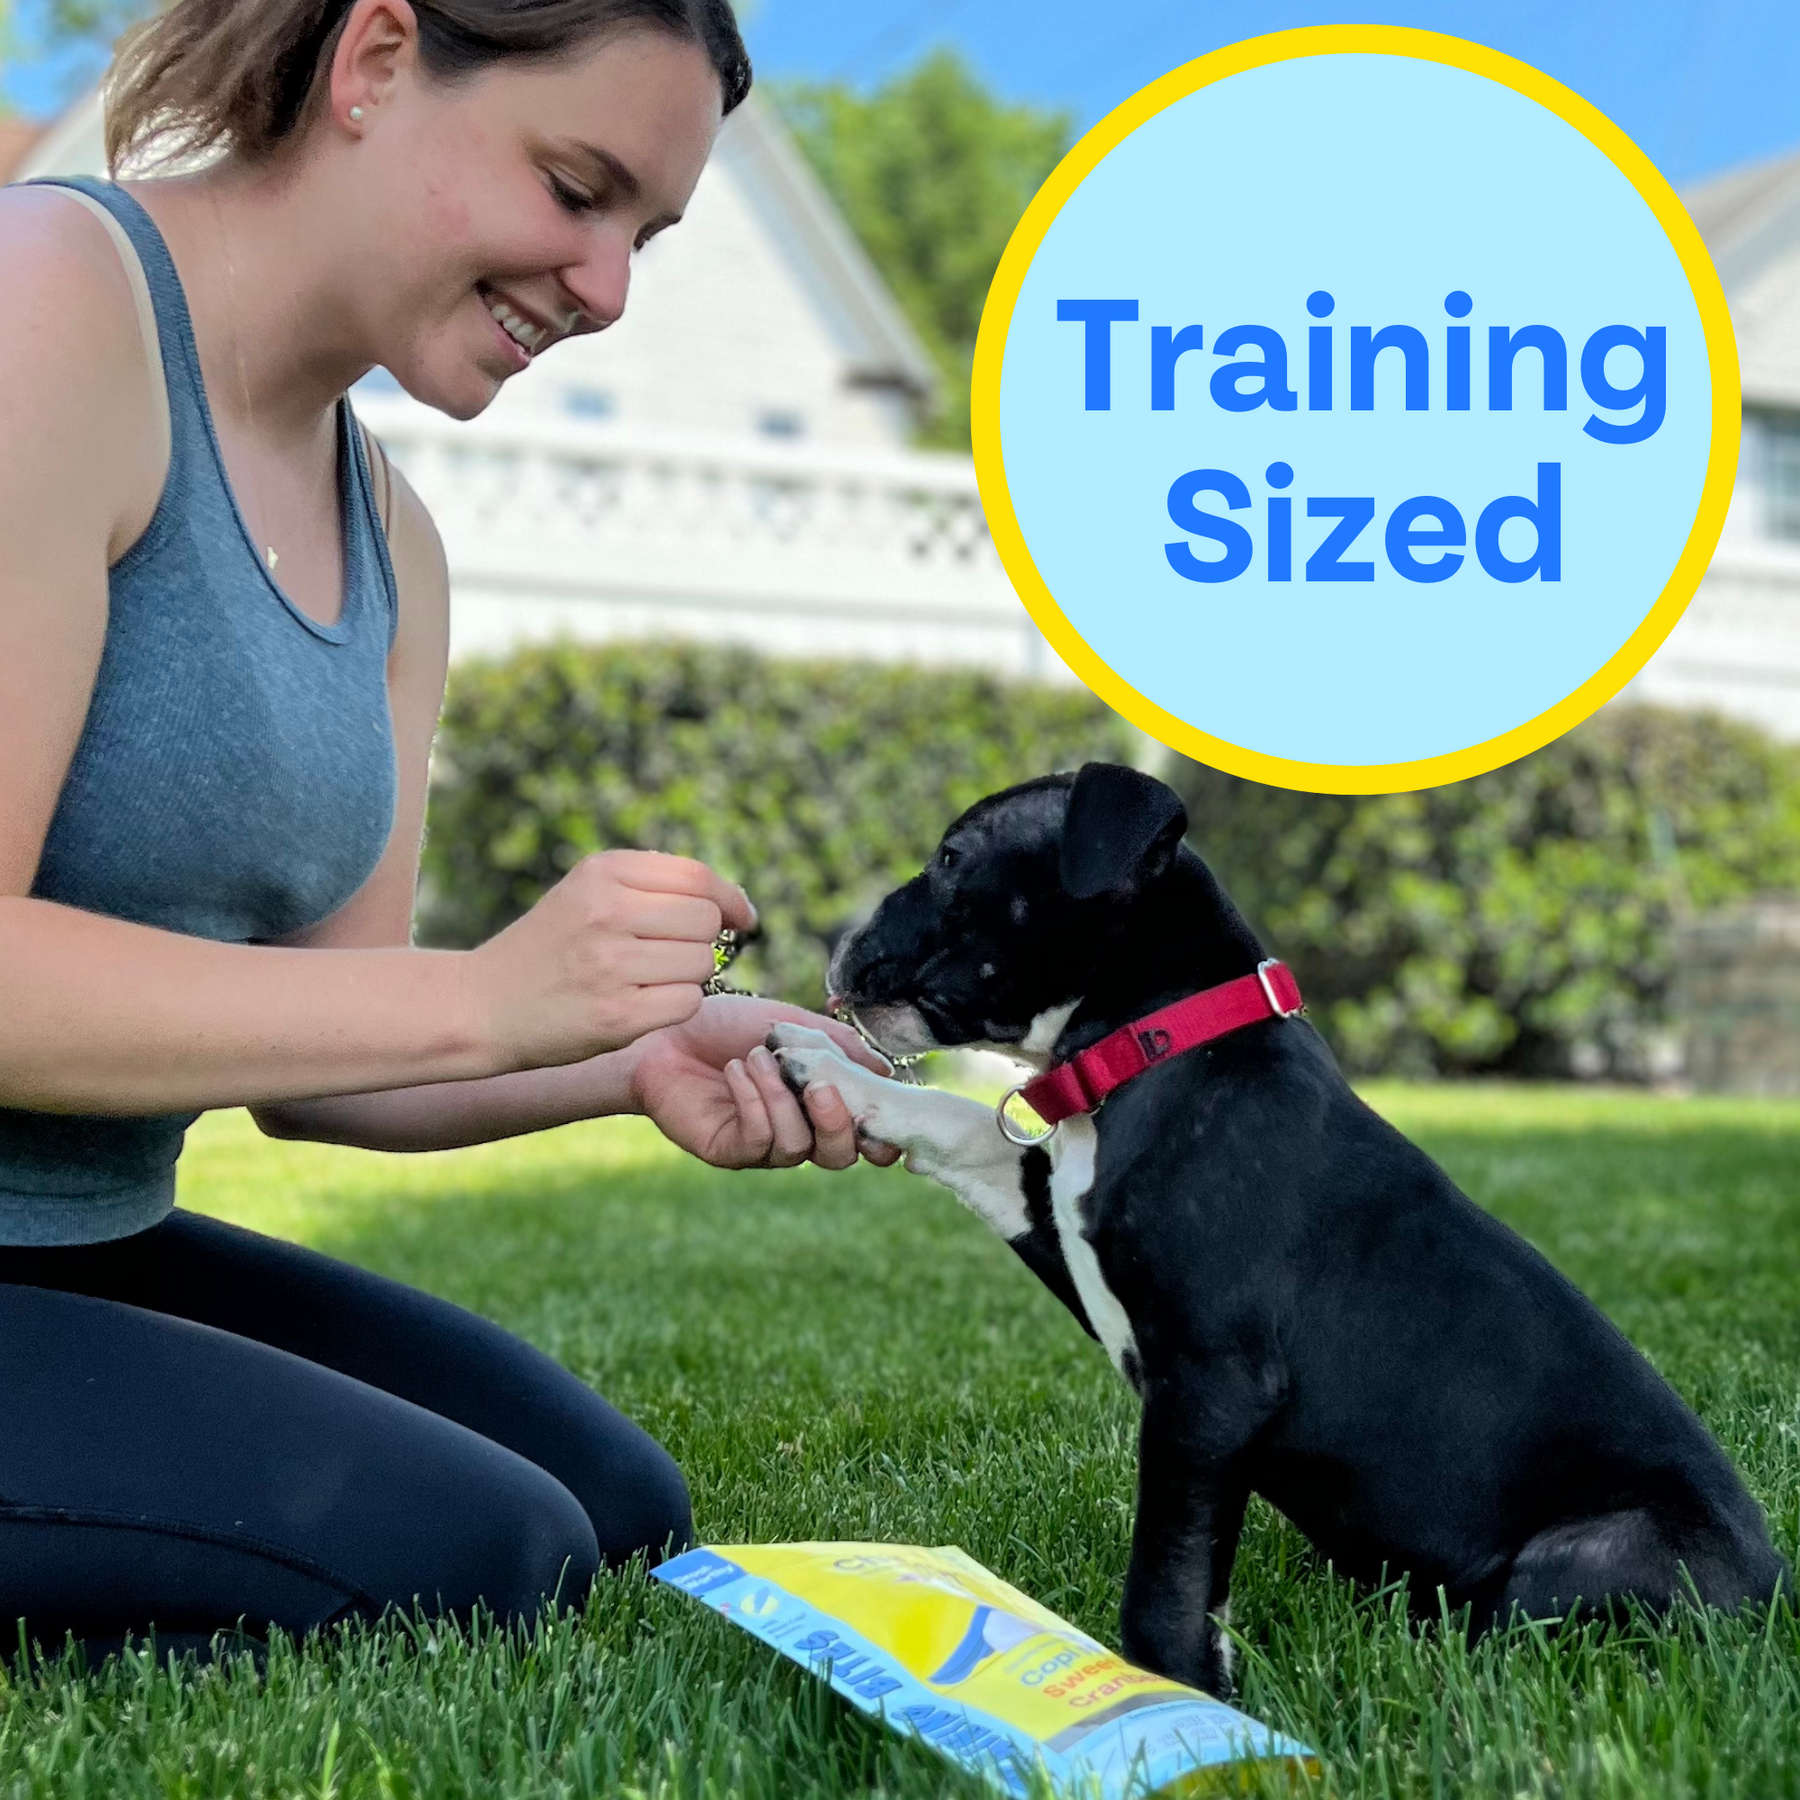 Puppy being trained by a woman on the lawy and the copy says training sized.